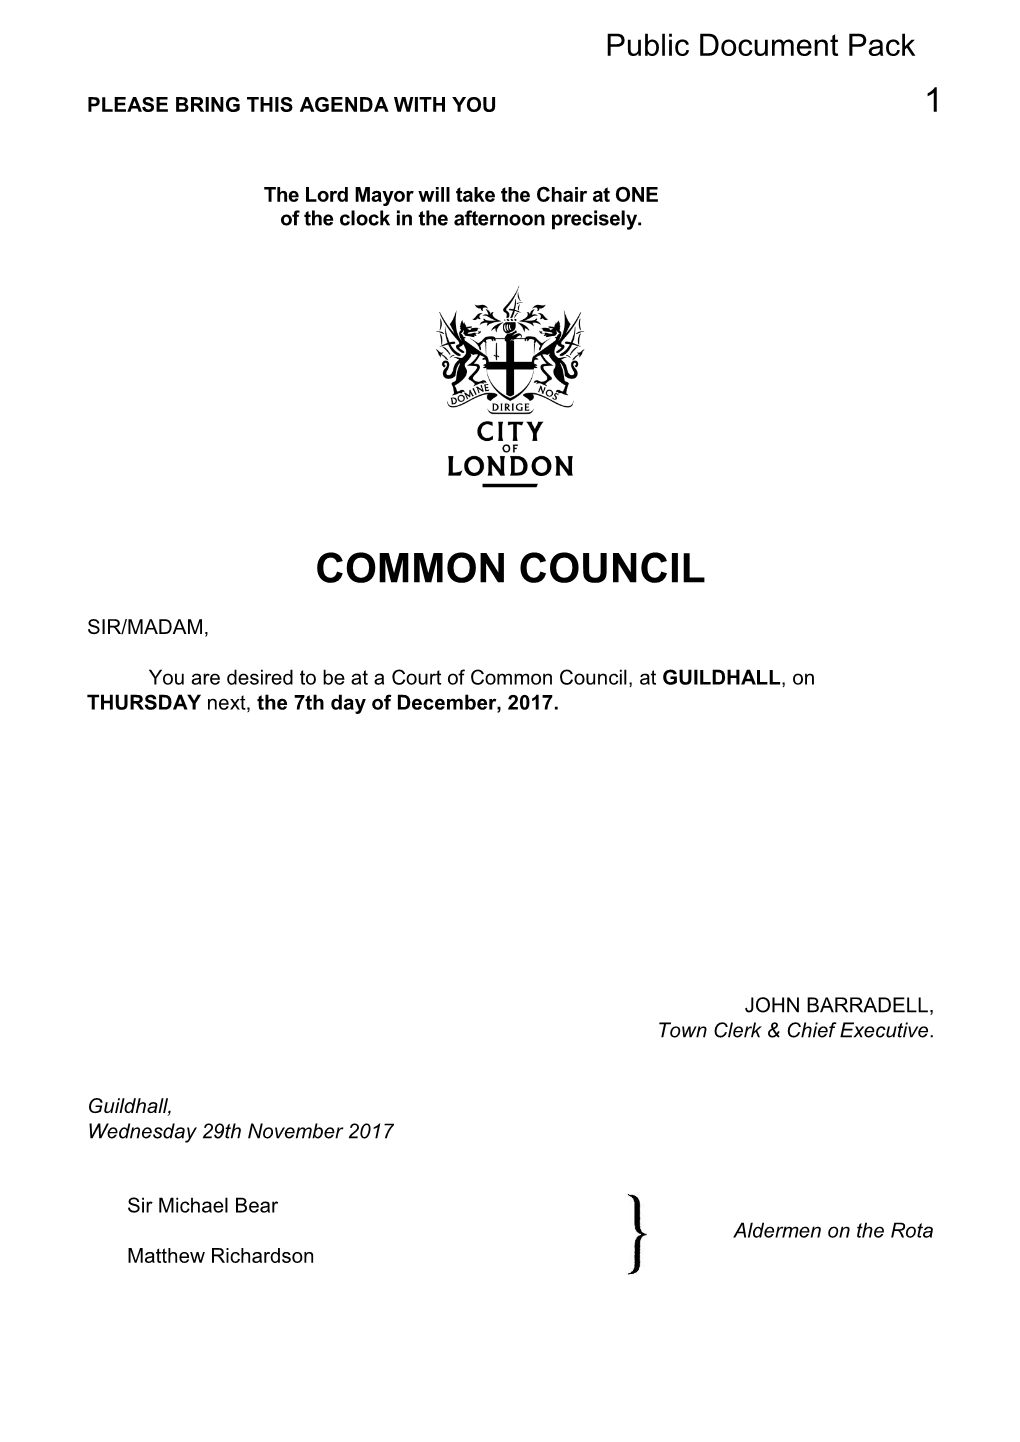 (Public Pack)Agenda Document for Court of Common Council, 07/12